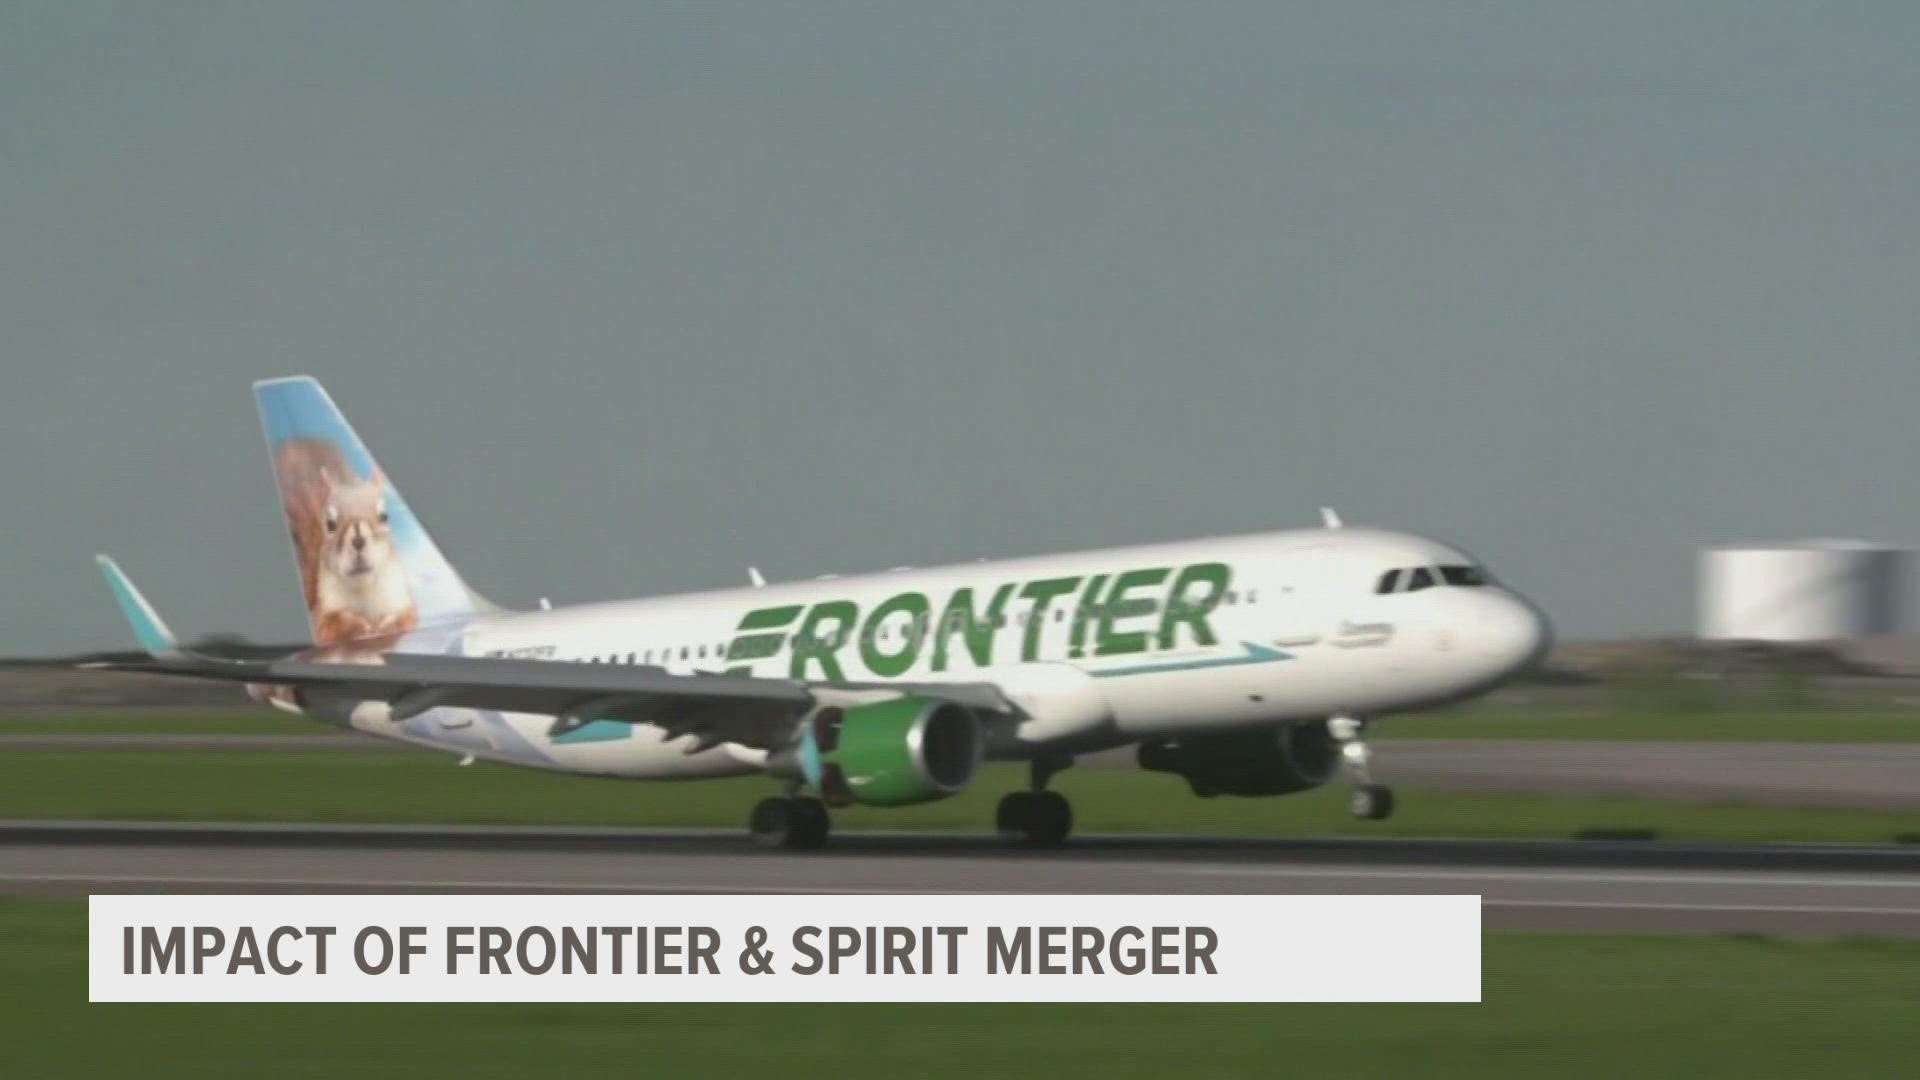 A spokesperson for the Des Moines International Airport said the merger could create new route opportunities.